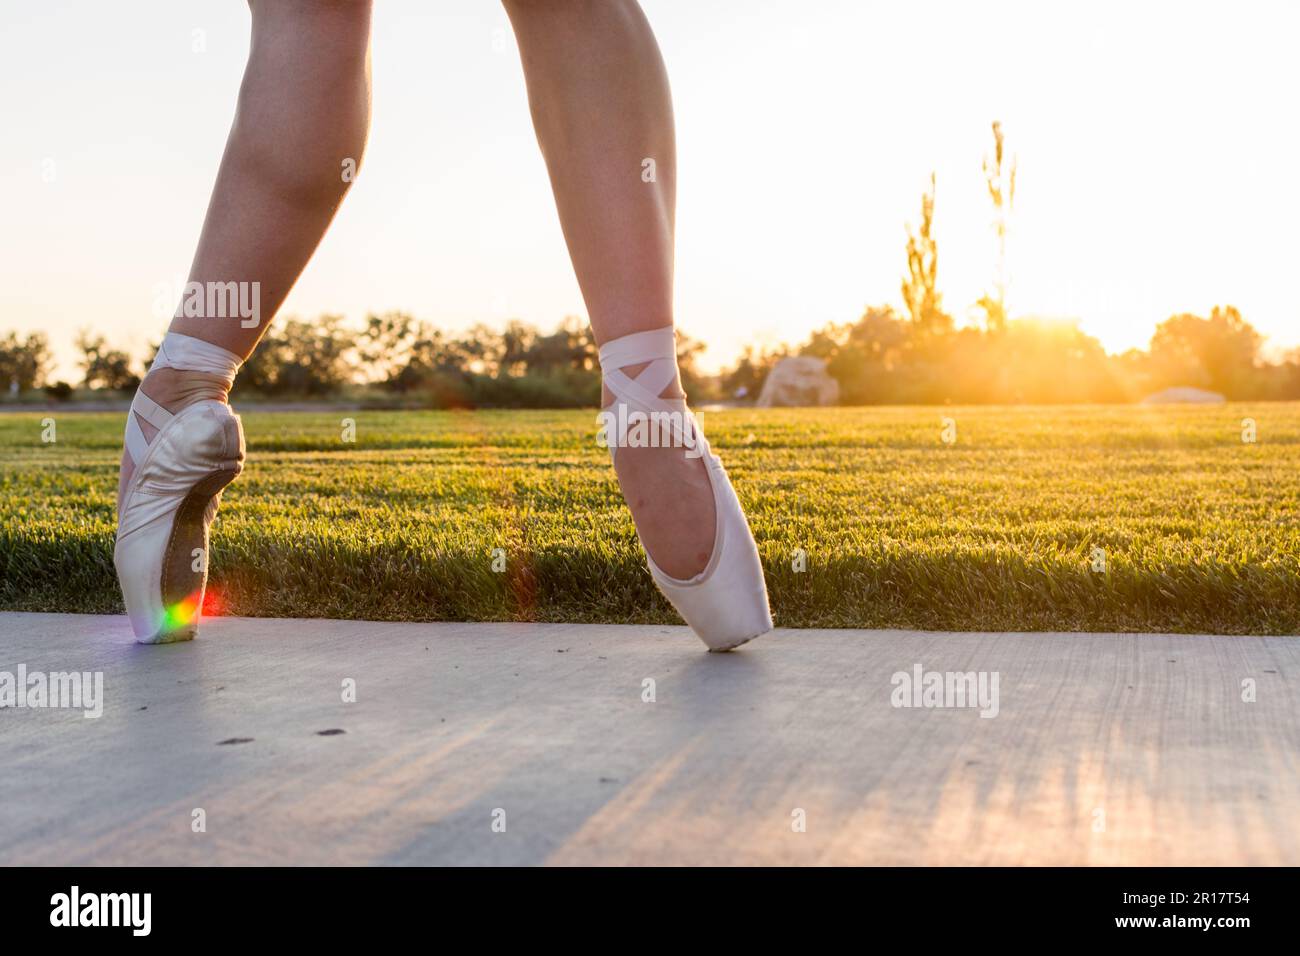 Feet of ballet dancer in pointe shoes at sunset with rainbow Stock Photo